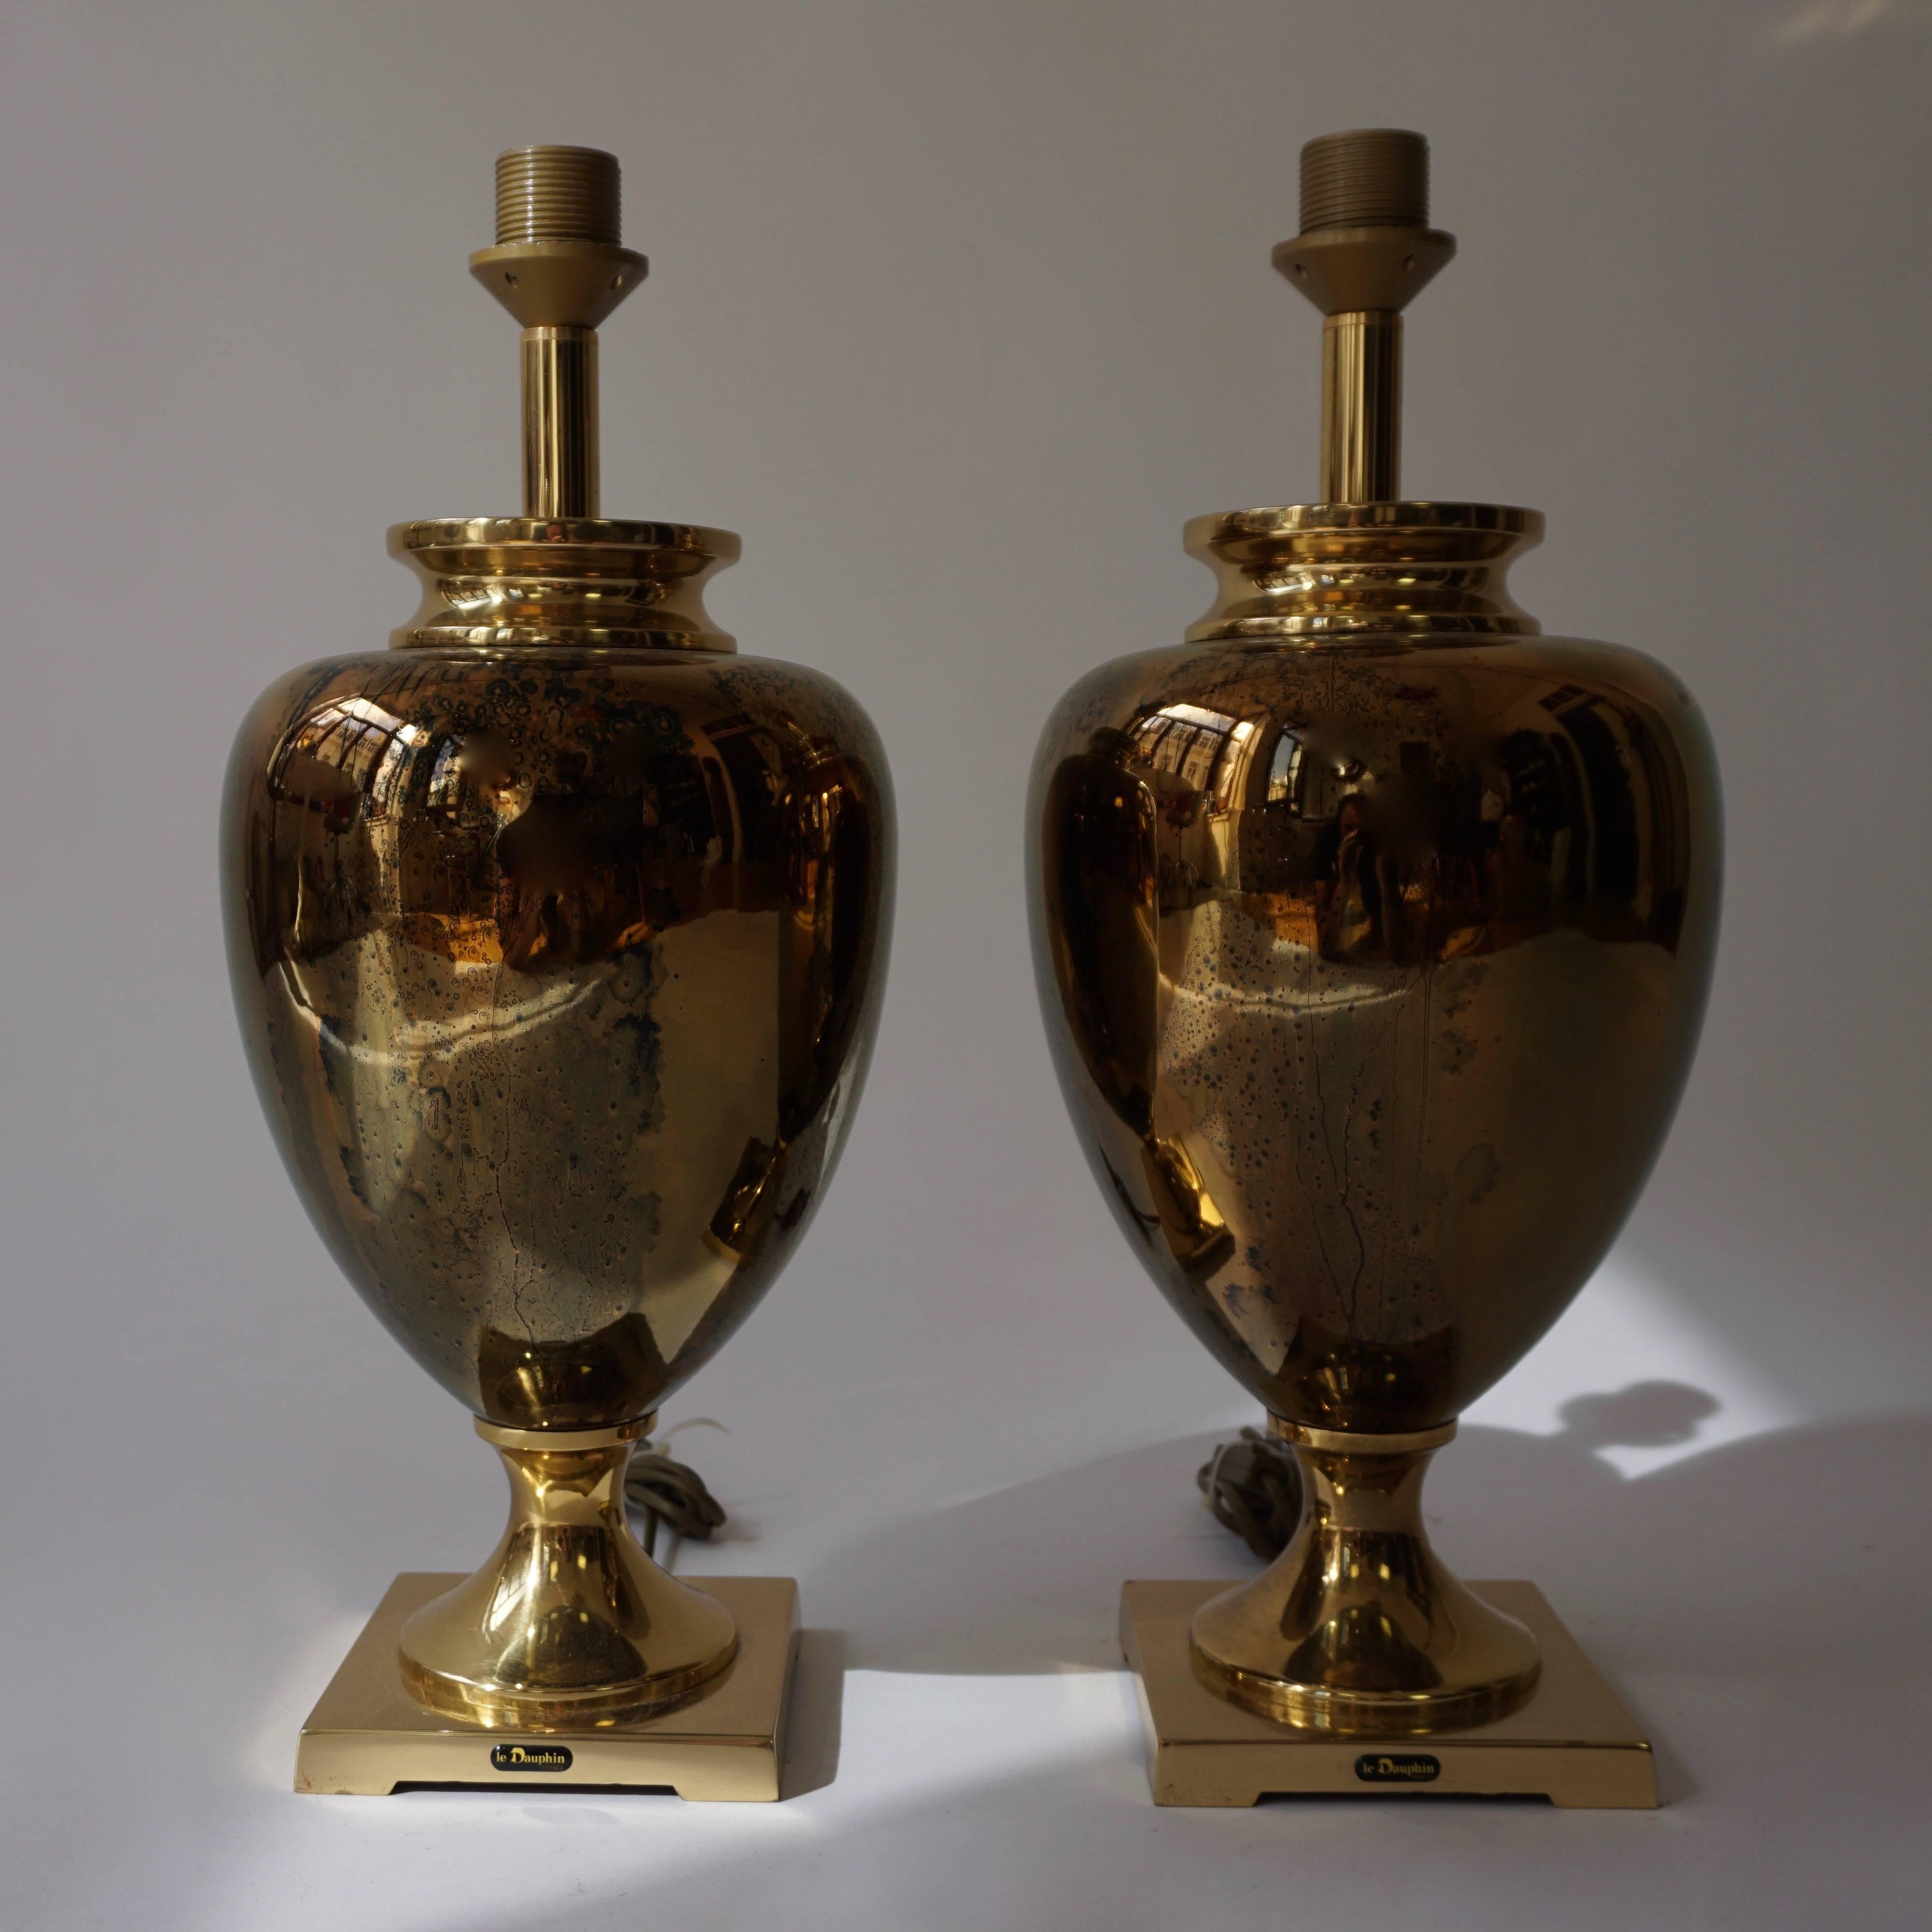 Elegant pair of lamps made by Maison Le Dauphin.
Height 50 cm.
Diameter 20 cm.